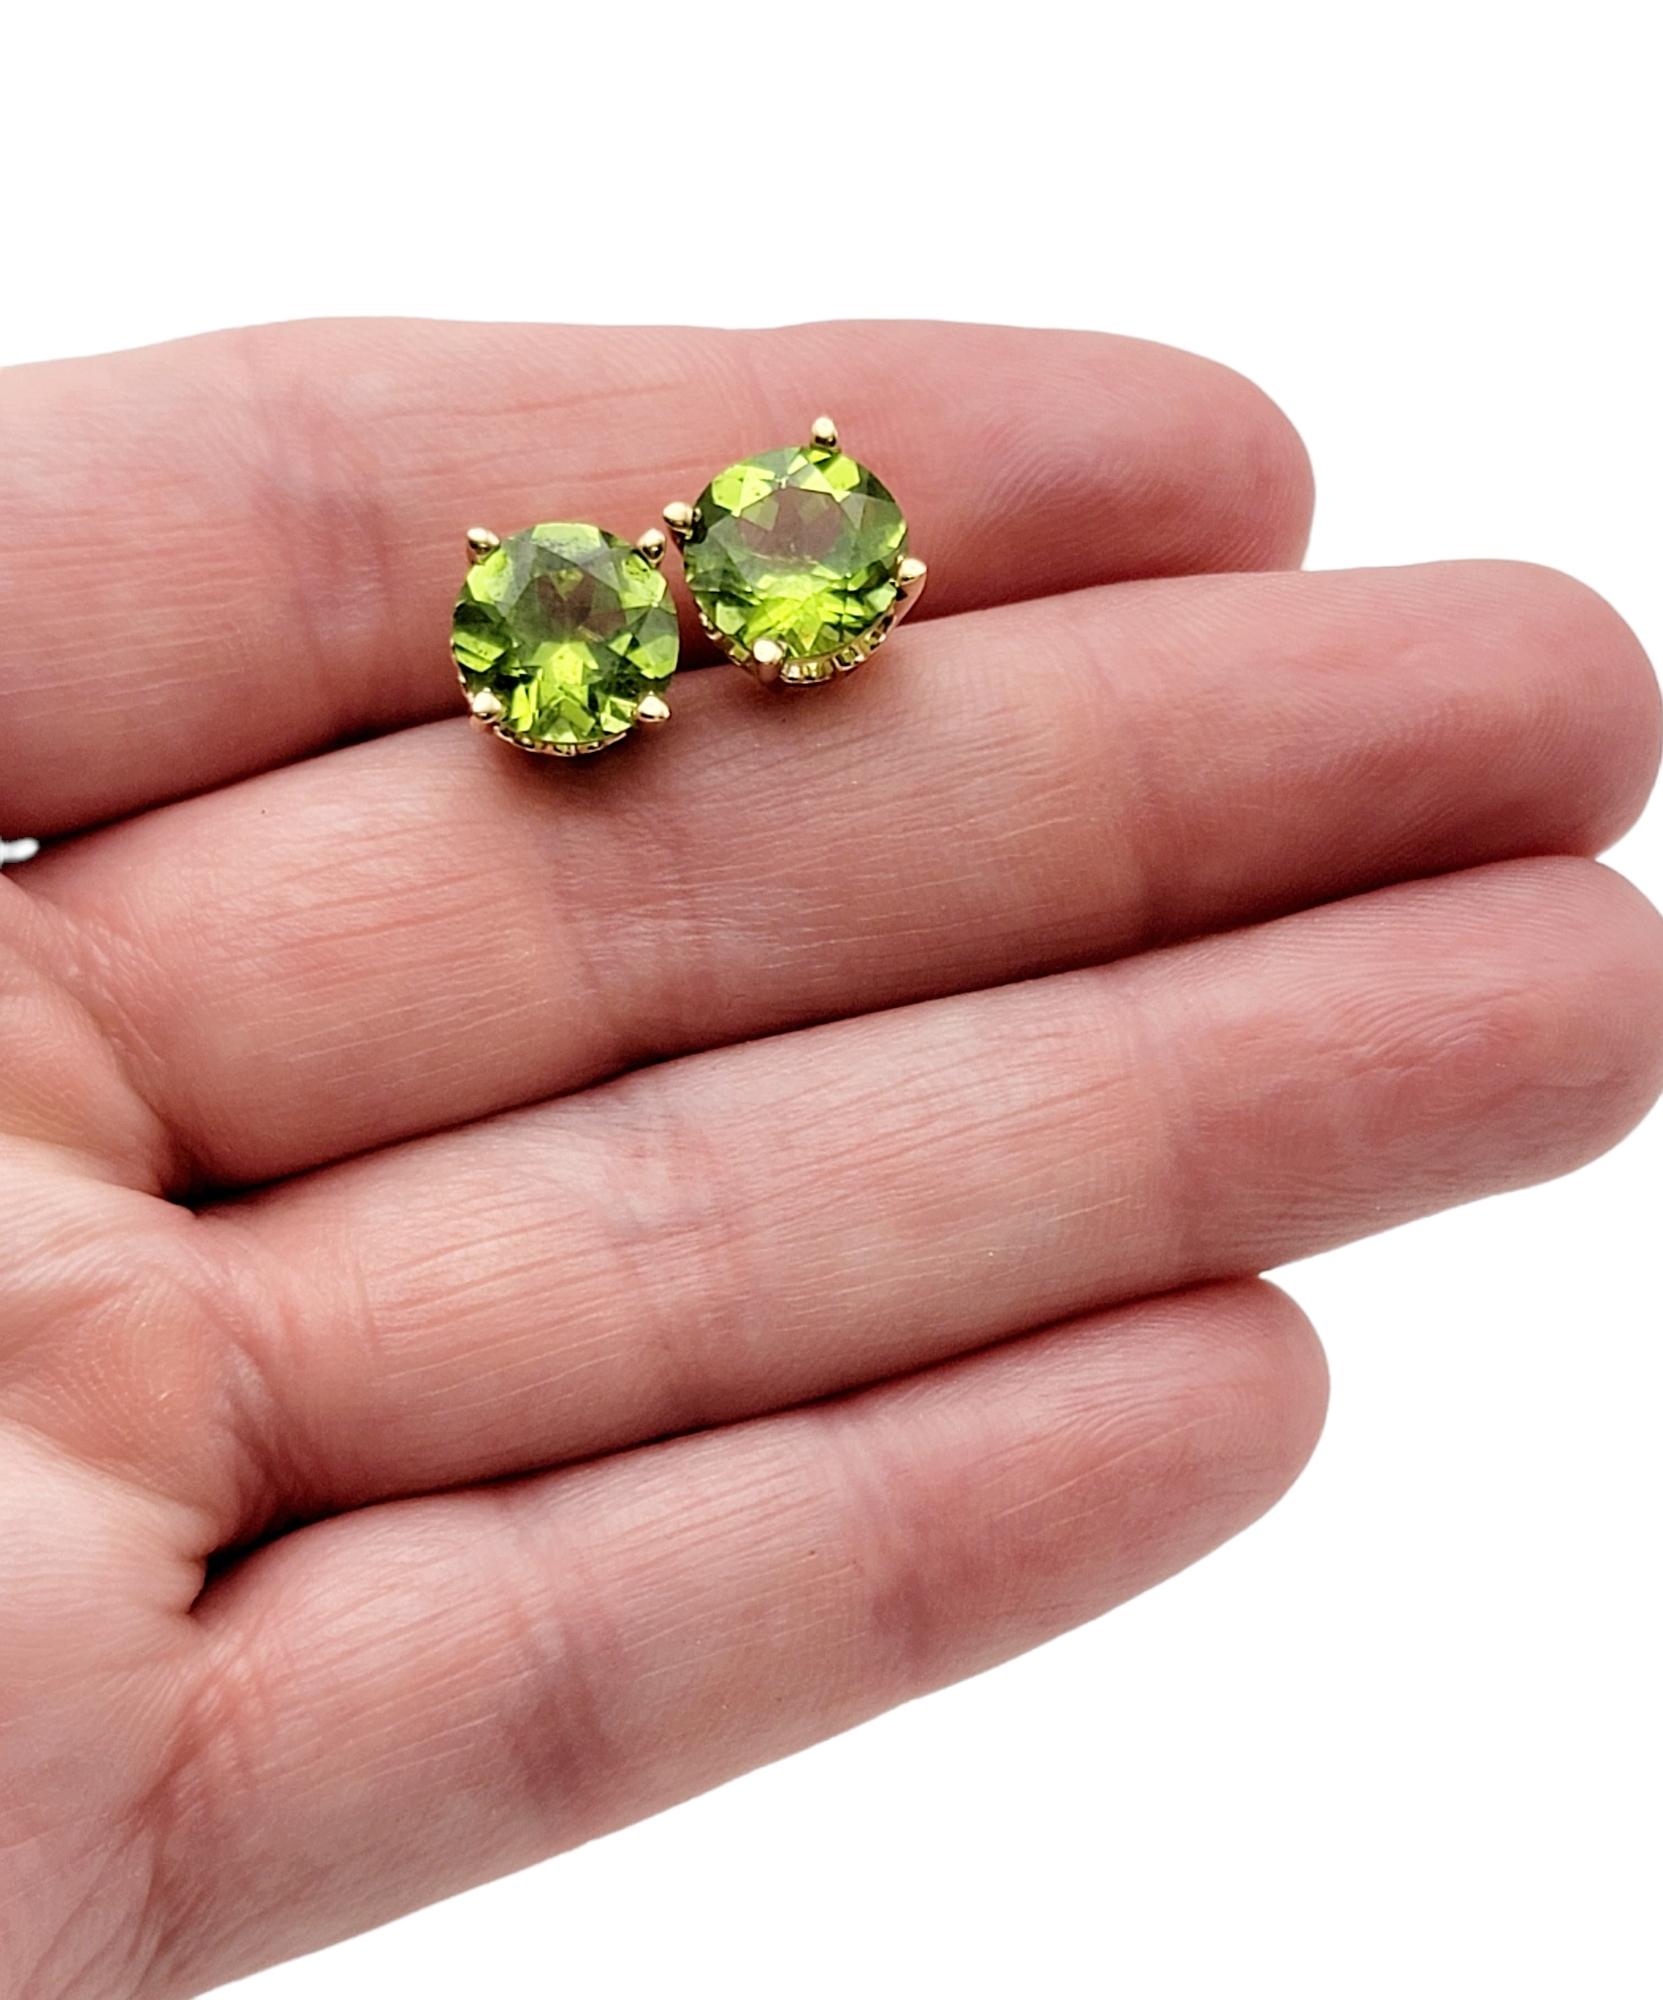 Large Round Brilliant Solitaire Green Peridot Stud Earrings in Yellow Gold For Sale 2